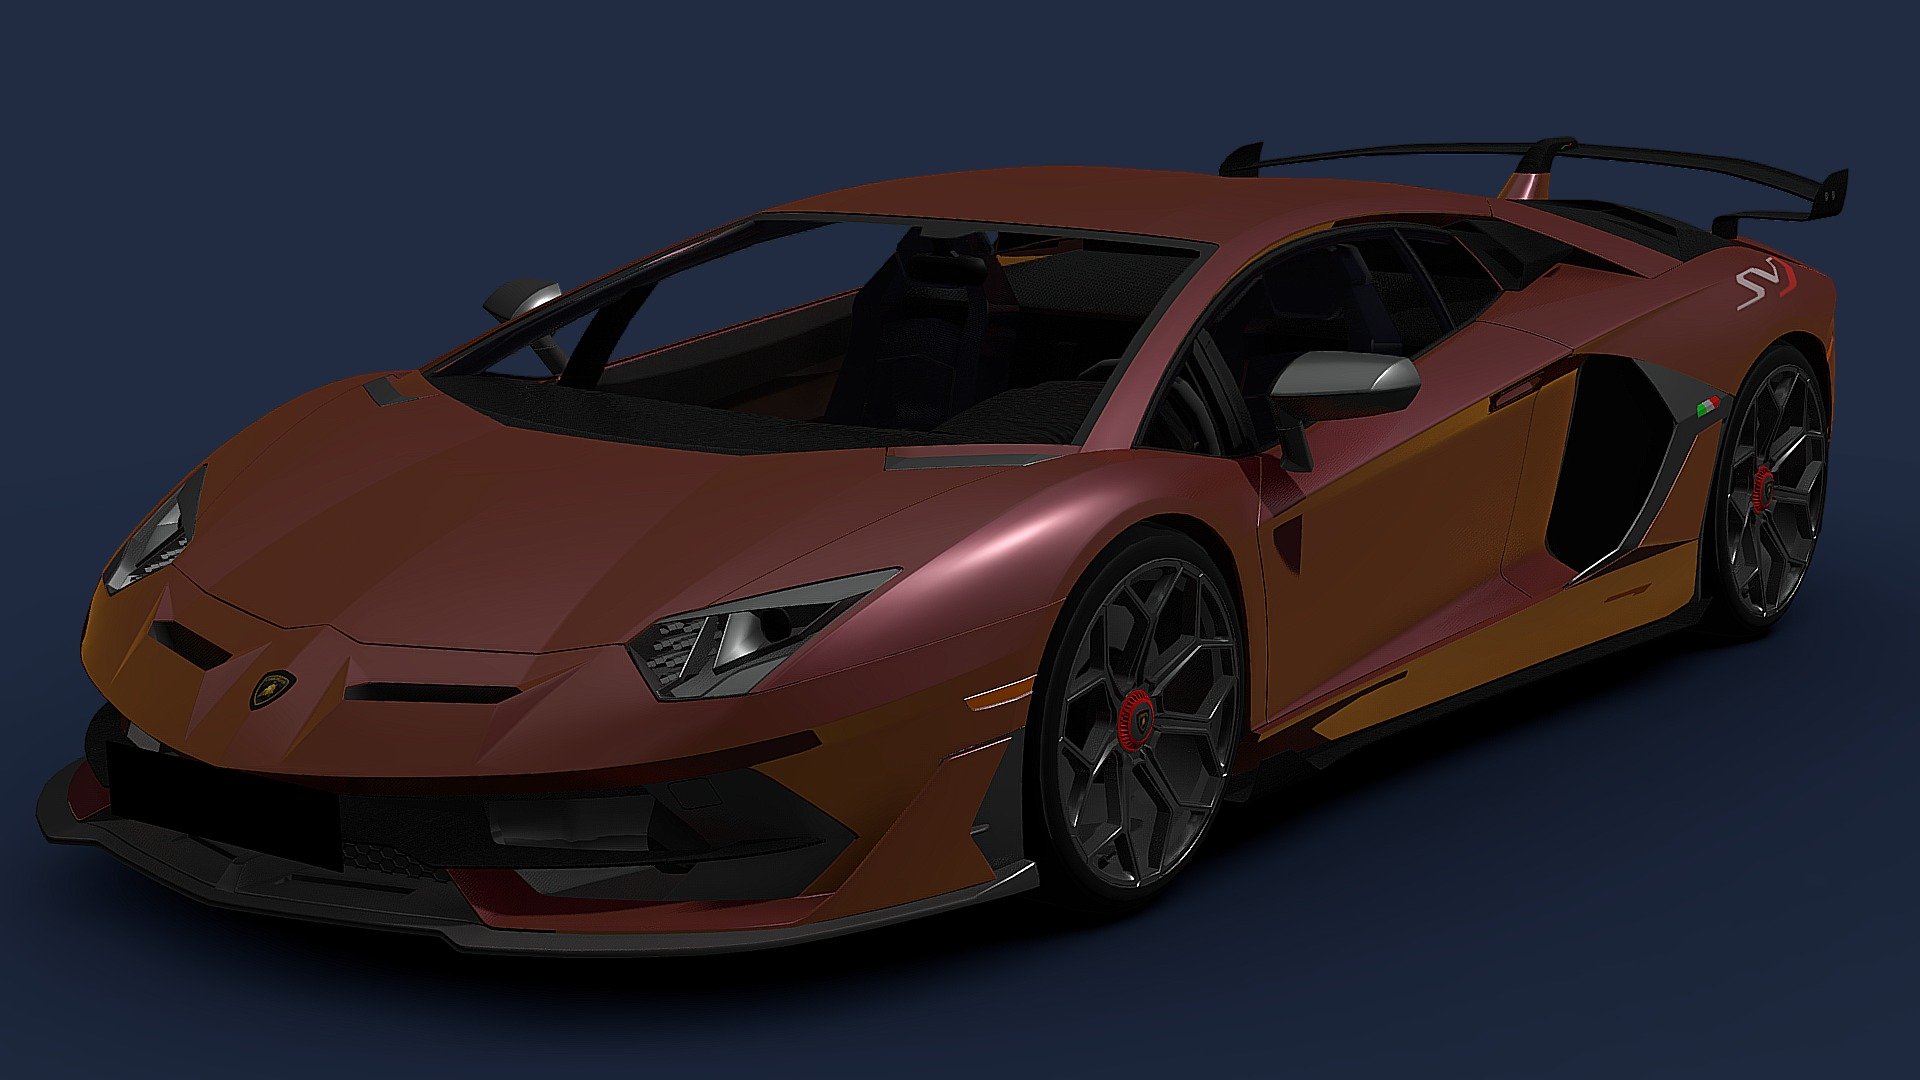 The Aventador SVJ features the ALA 2.0 system, which incorporates new air intake and aero channel designs, delivering maximum dynamic performance.
- It offers a unique combination of the active steering system (Lamborghini Dynamic Steering) and the rear-steering system (Lamborghini Rear-wheel Steering
- The Aventador SVJ is powered by a mid-mounted naturally aspirated 6.5-liter V-12 engine that develops 759 horsepower and 531 lb-ft of torque, transmitted to the wheels via a seven-speed automated-manual transmission.
- This powerful engine allows the Aventador SVJ to accelerate from 0 to 60 mph in less than three seconds and achieve a top speed of 217 mph.
- The SVJ holds the Nürburgring Nordschleife production car lap record, showcasing its exceptional performance capabilities 3d model